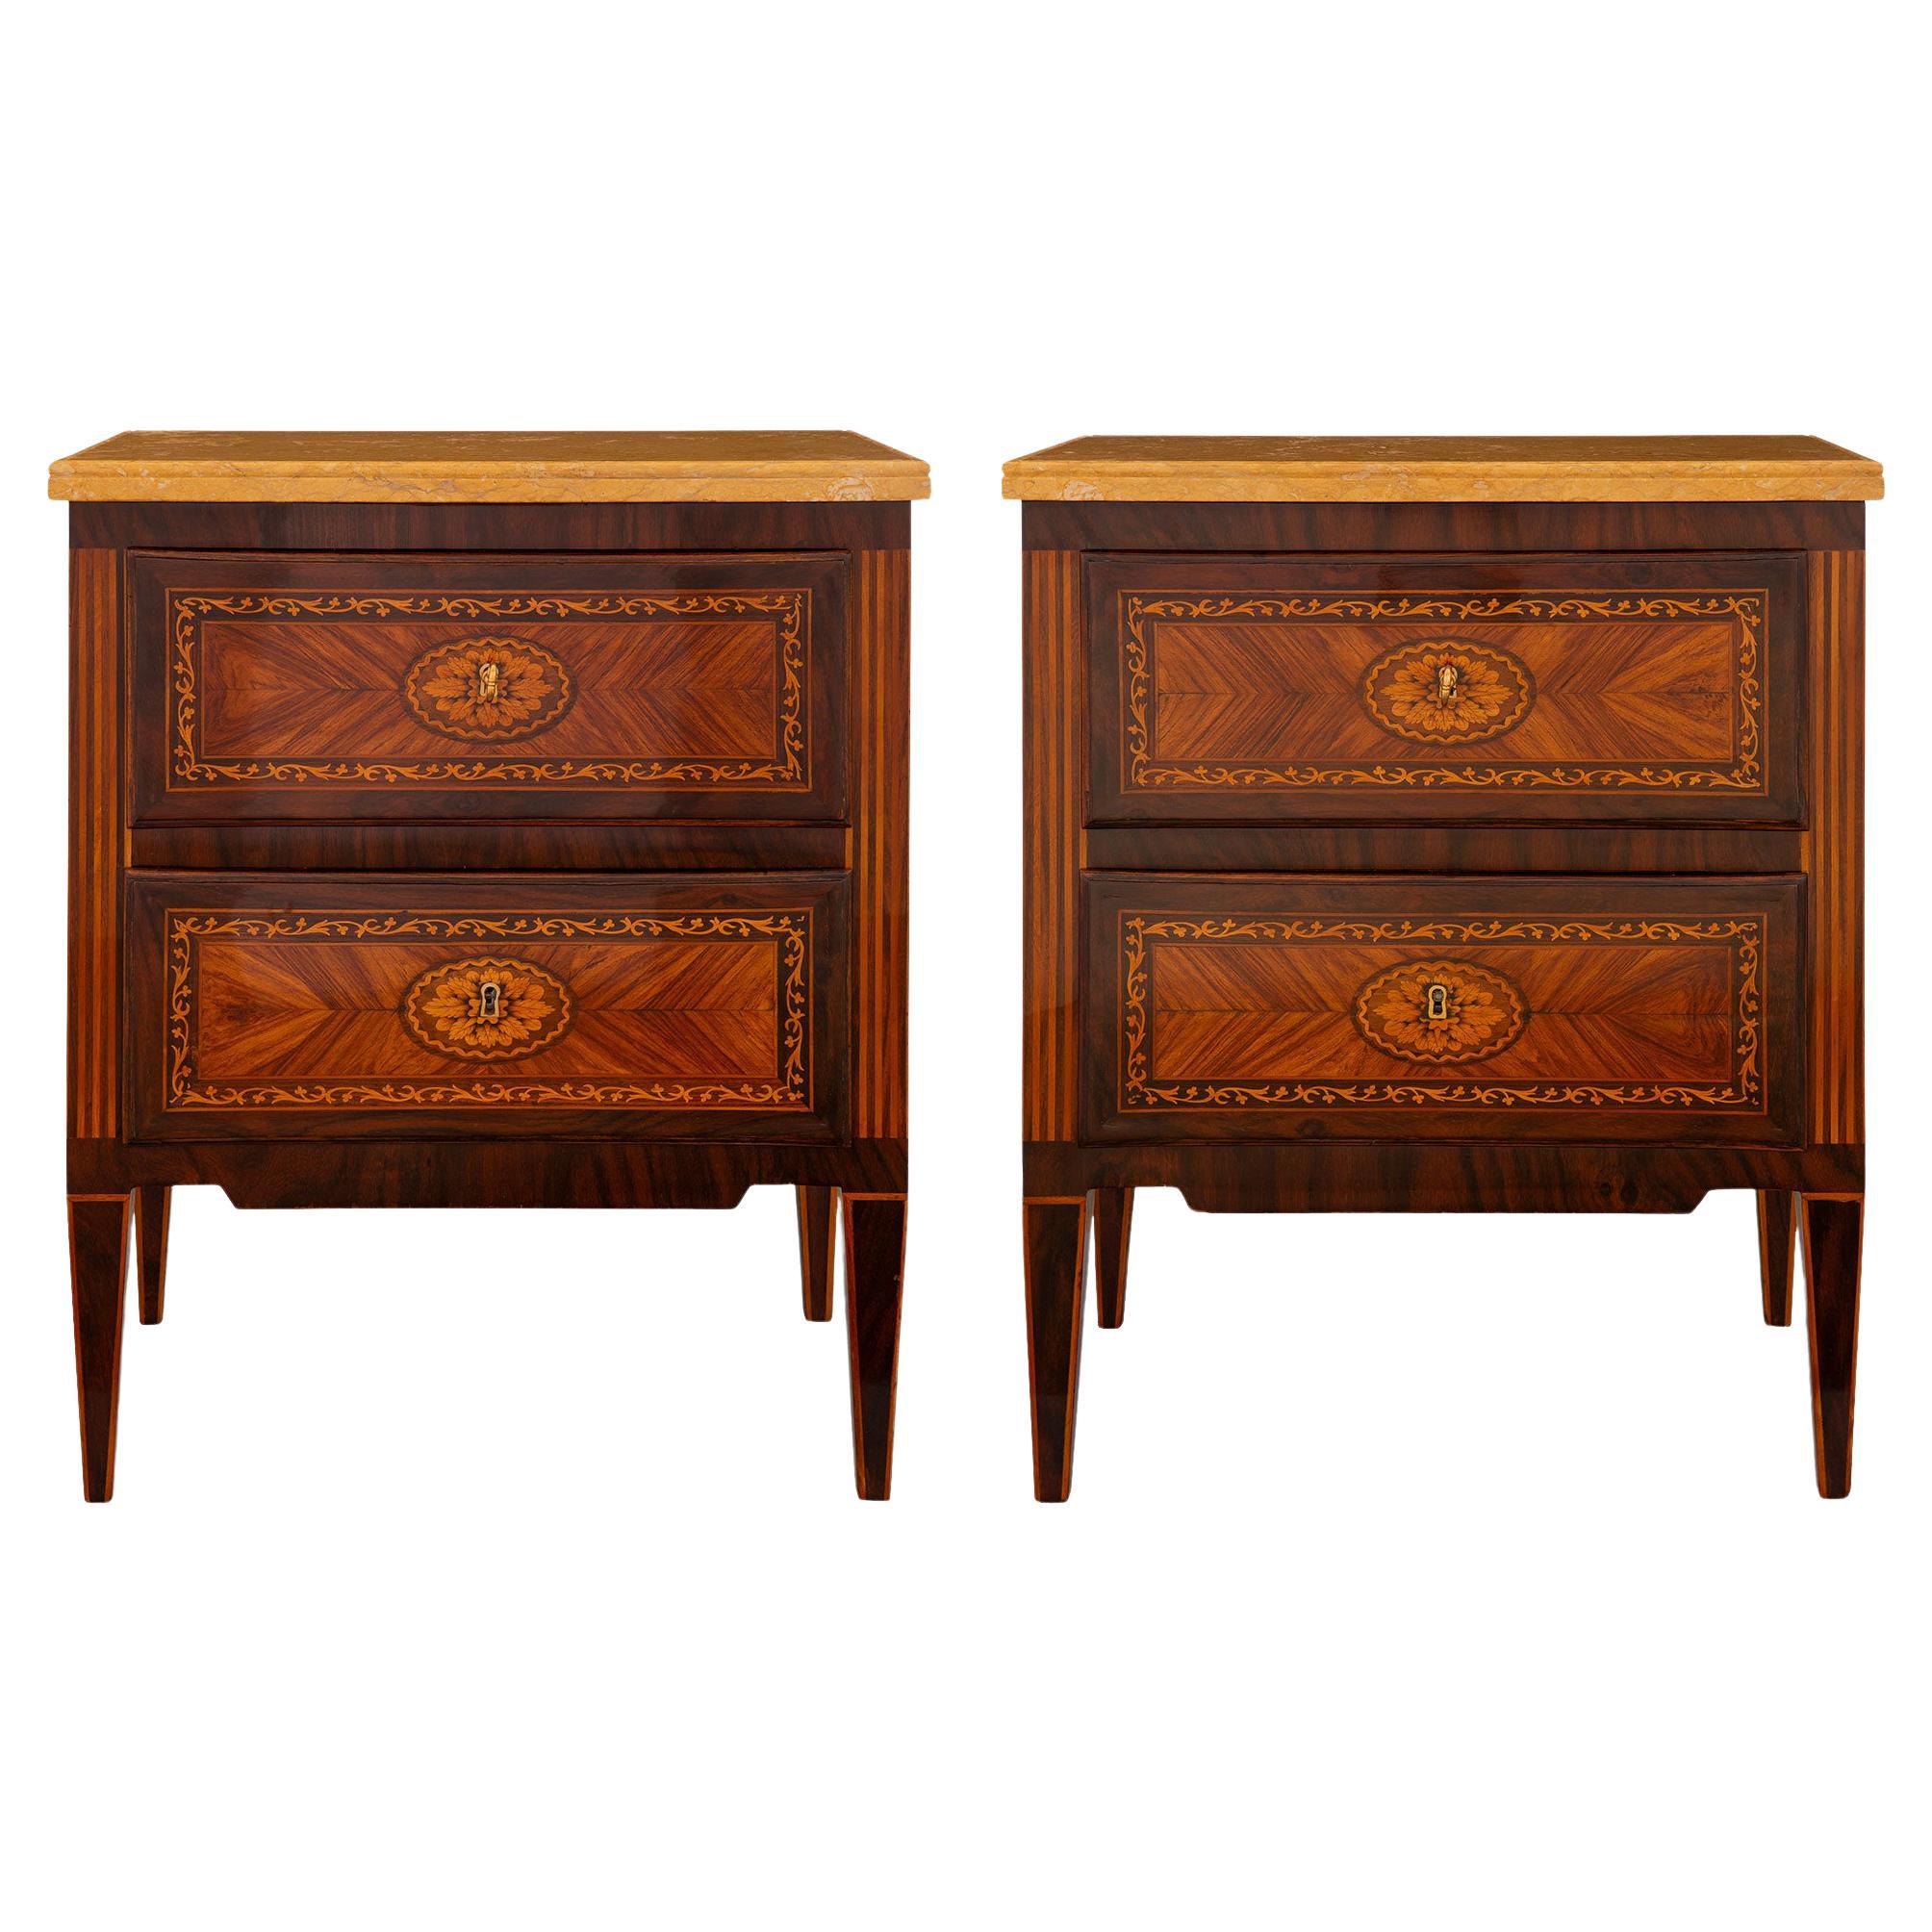 Pair of Italian 19th Century Louis XVI St. Kingwood and Sienna Marble Commodes